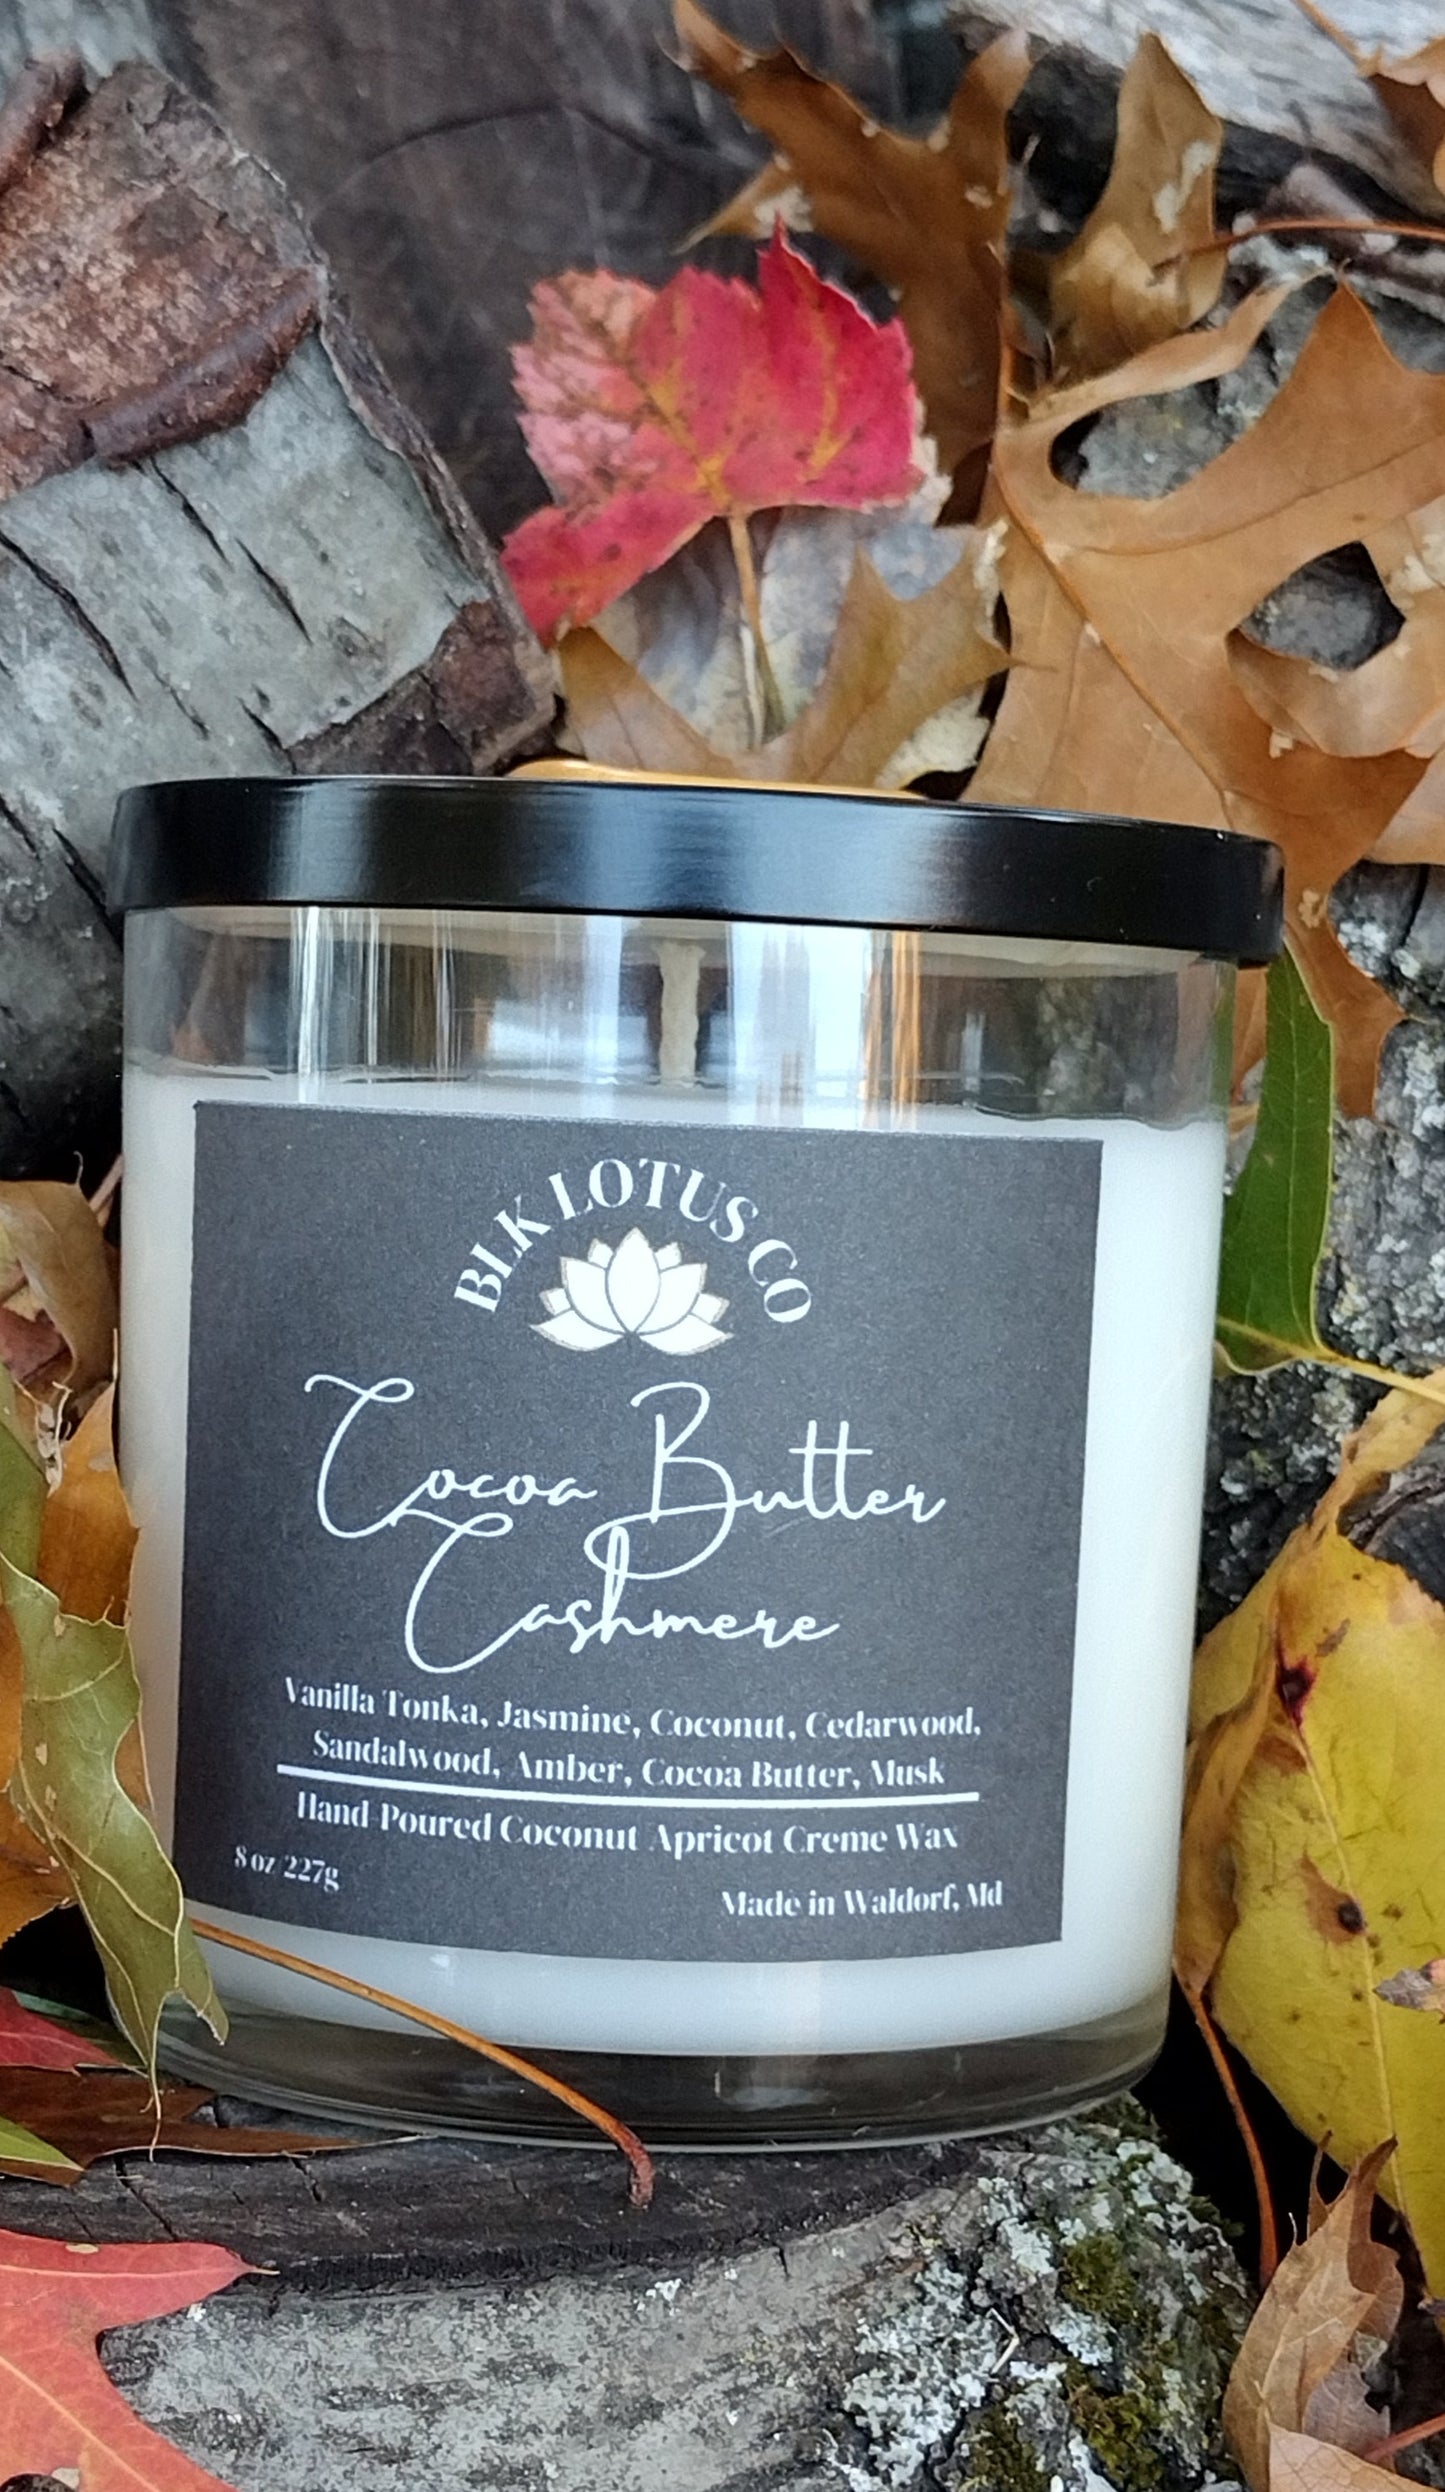 8oz Cocoa Butter Cashmere Delight: Hand-Poured Luxury Candle